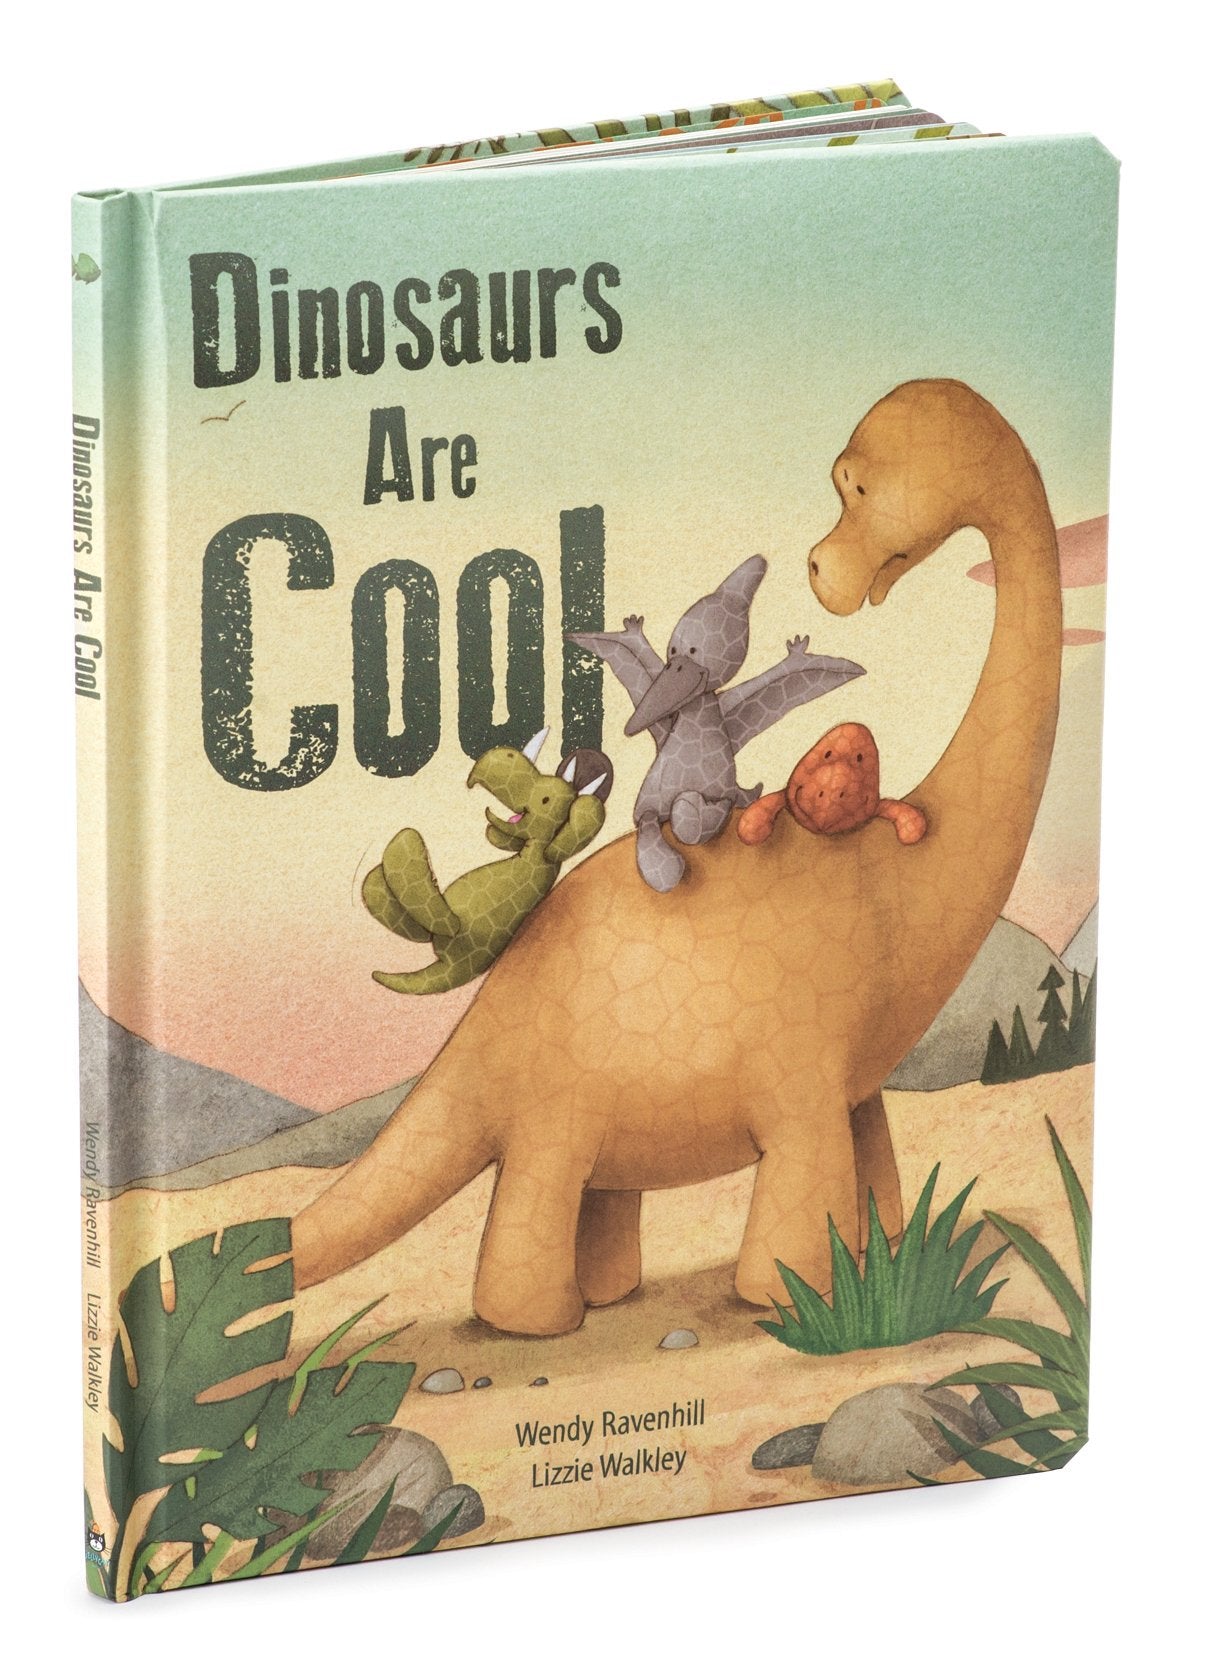 DINOSAURS ARE COOL